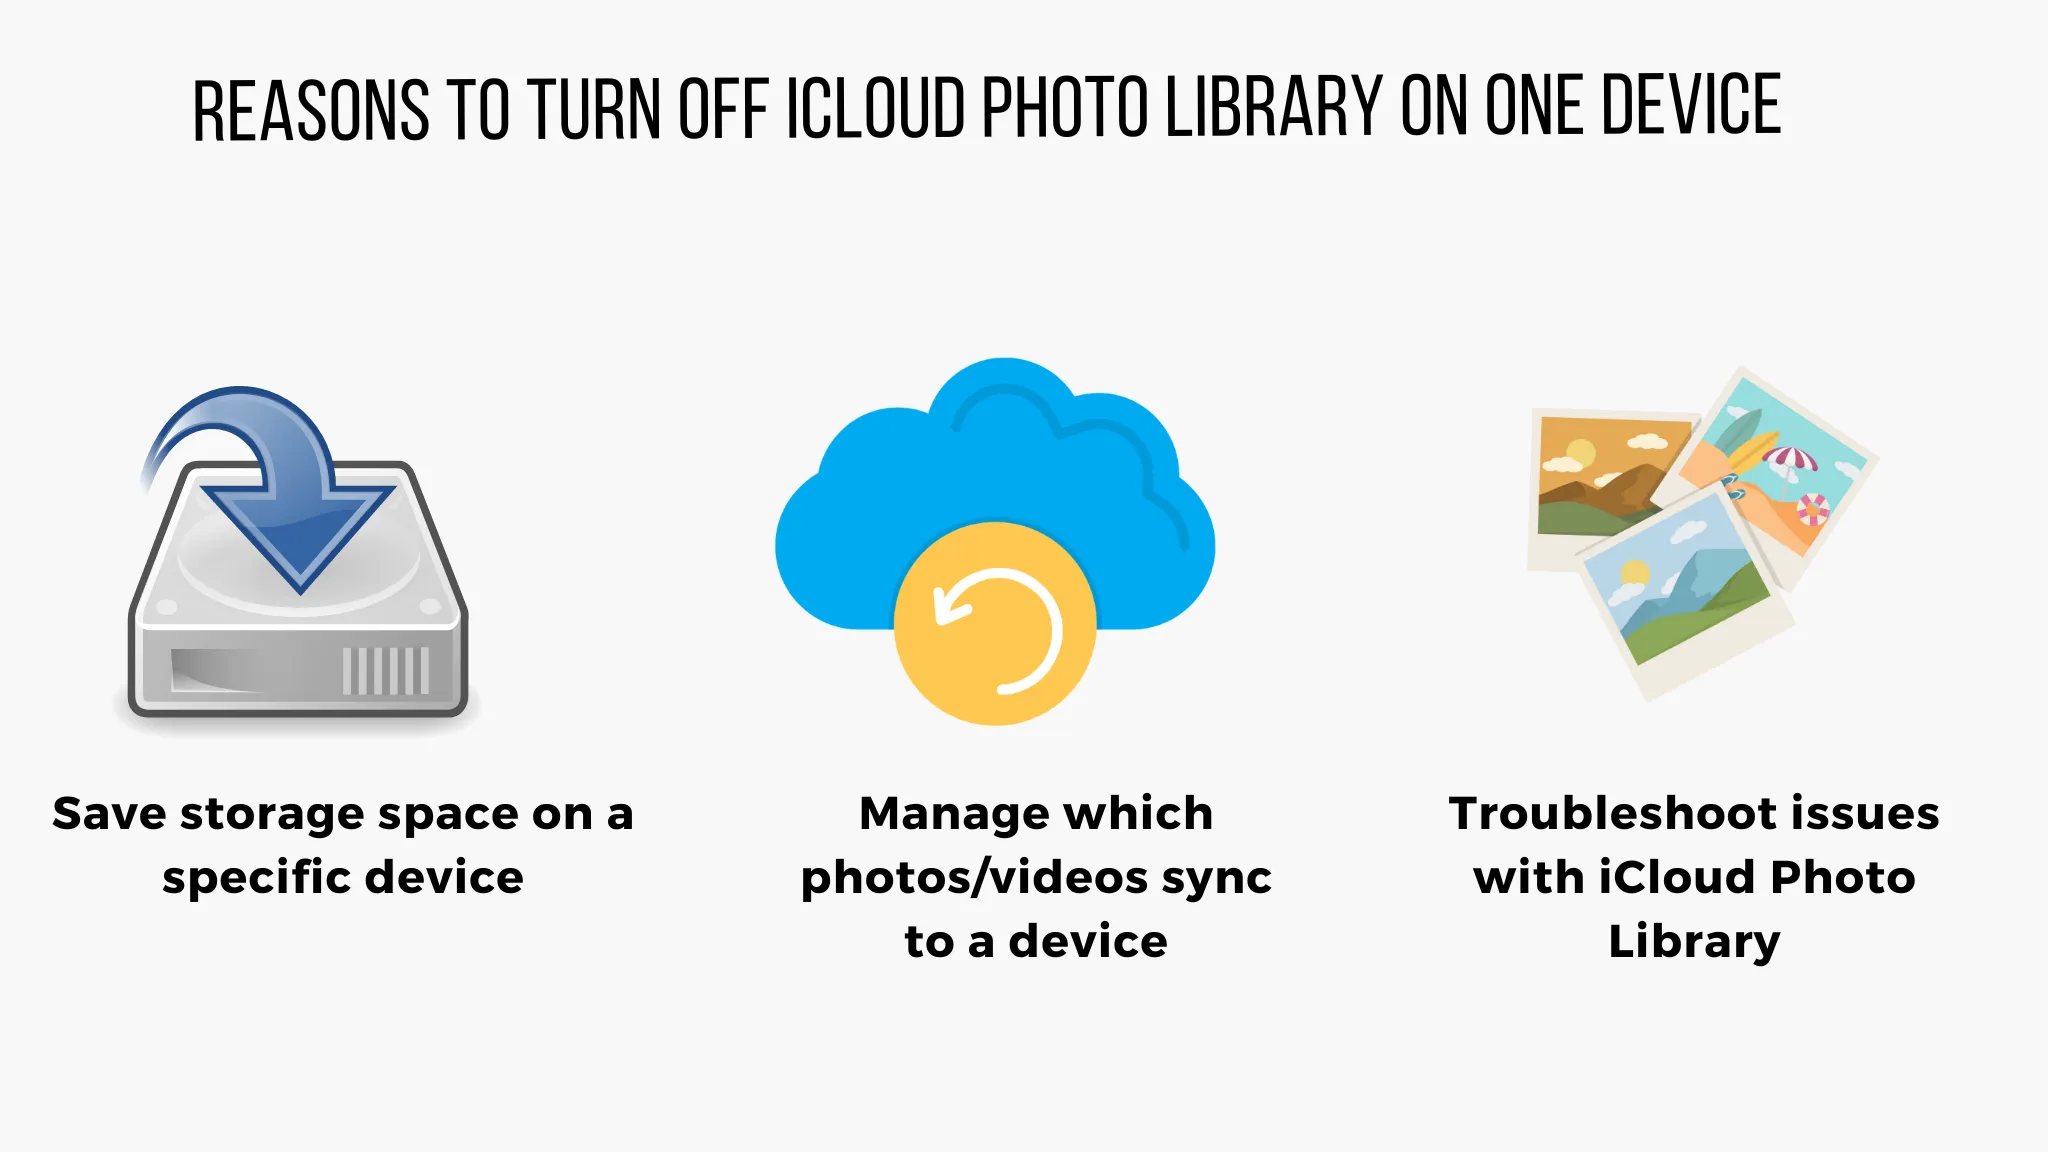 iCloud Photo Library on One Device